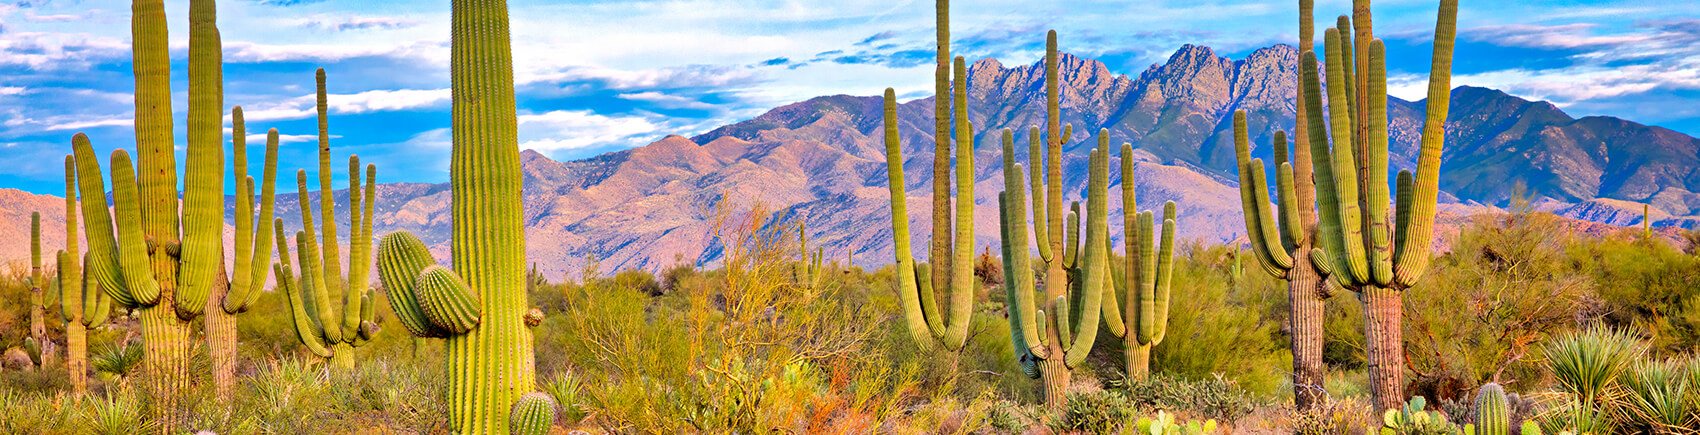 Landscape view of cactus plants and mountain range